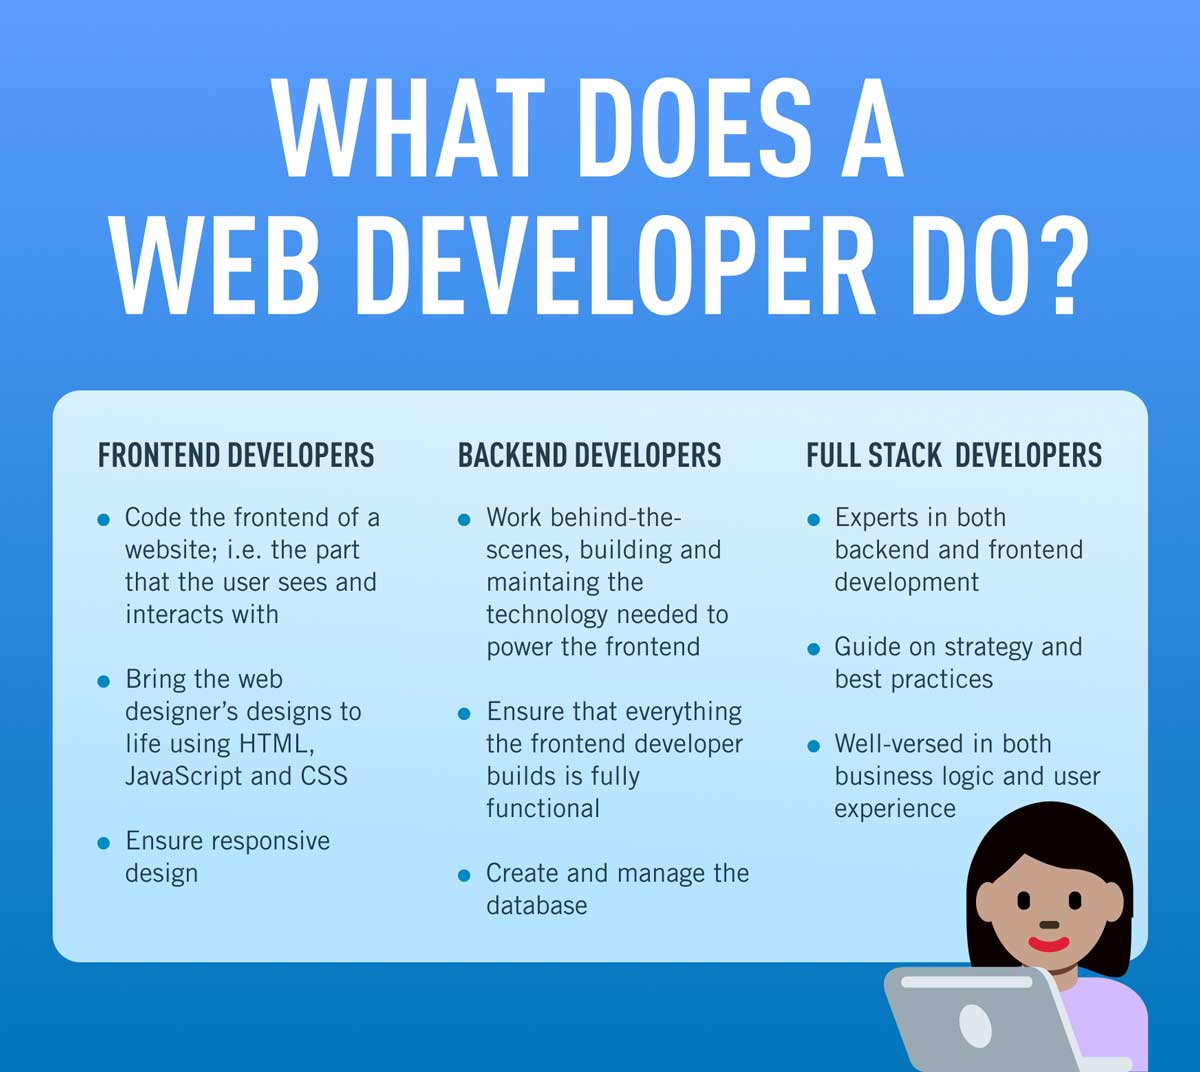 A comparison of the tasks of a frontend developer vs. backend developer vs. full-stack developer